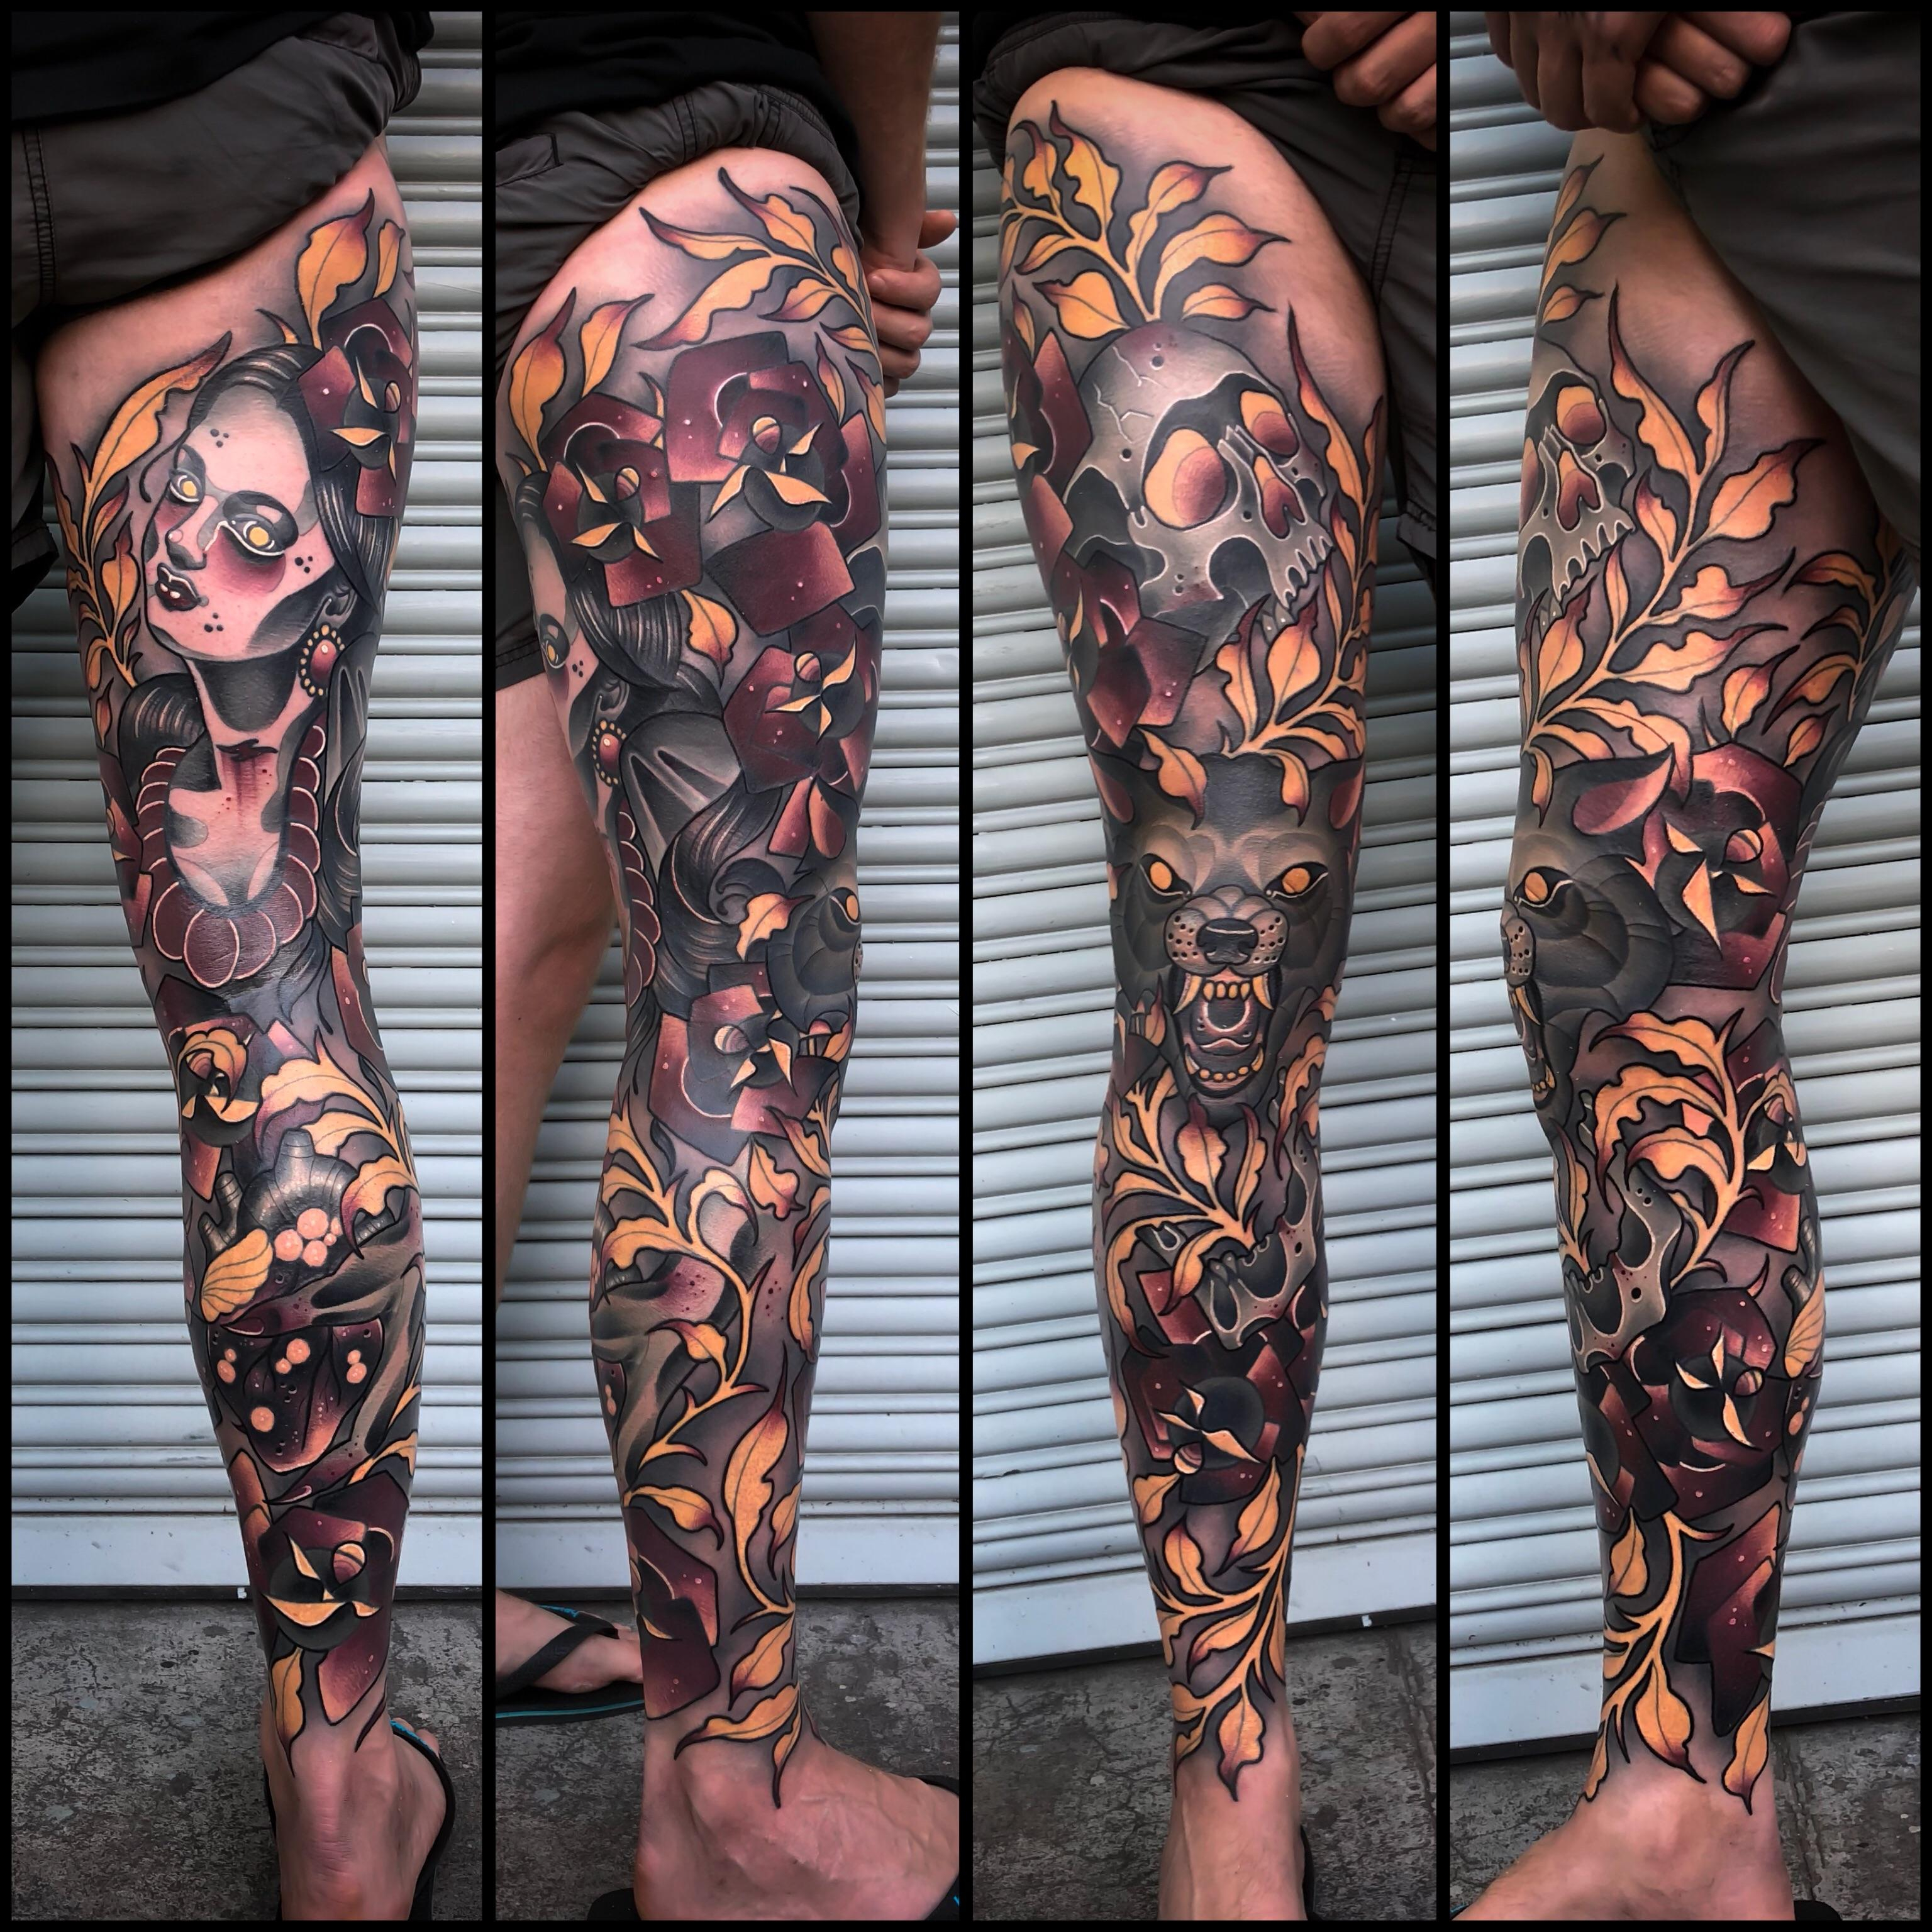 My Leg Sleeve Matt Curzon Out Of Empire In Prahran Melbourne throughout dimensions 3072 X 3072